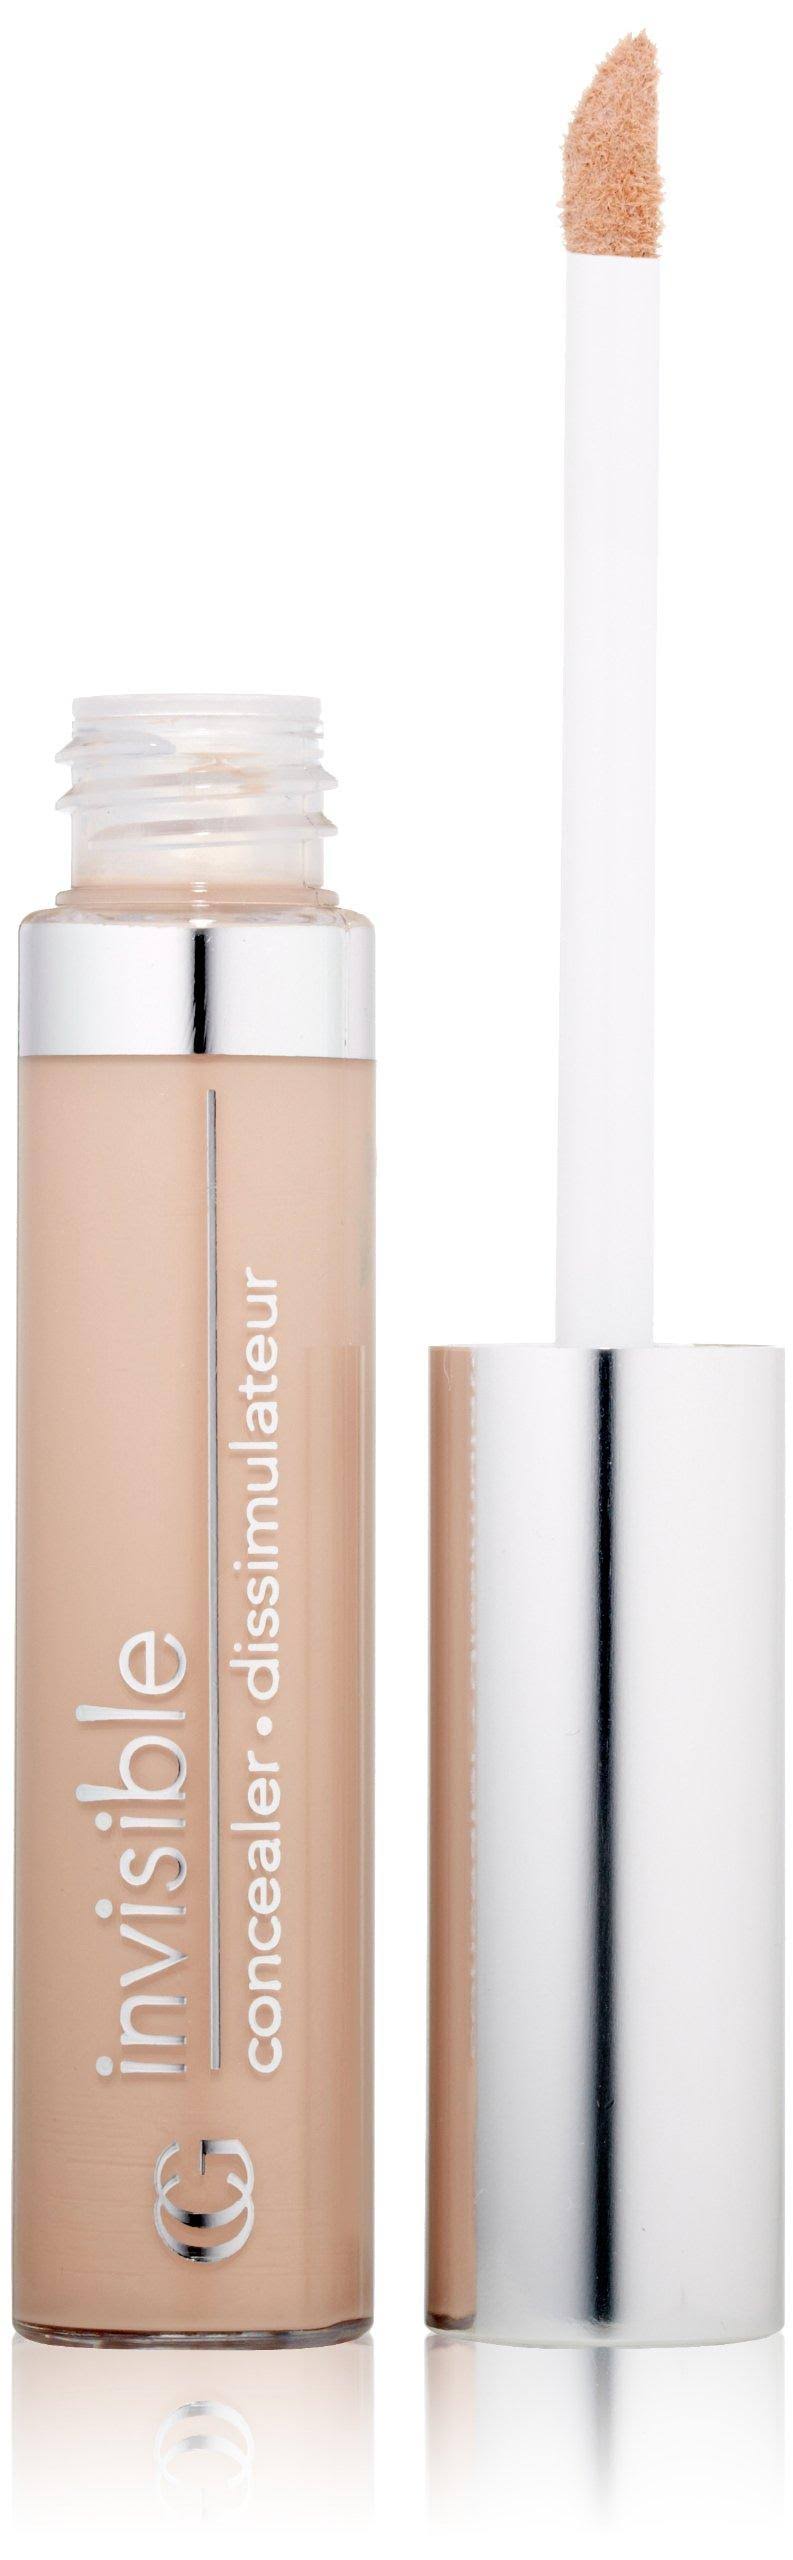 Covergirl Clean Invisible Concealer - 125 Light